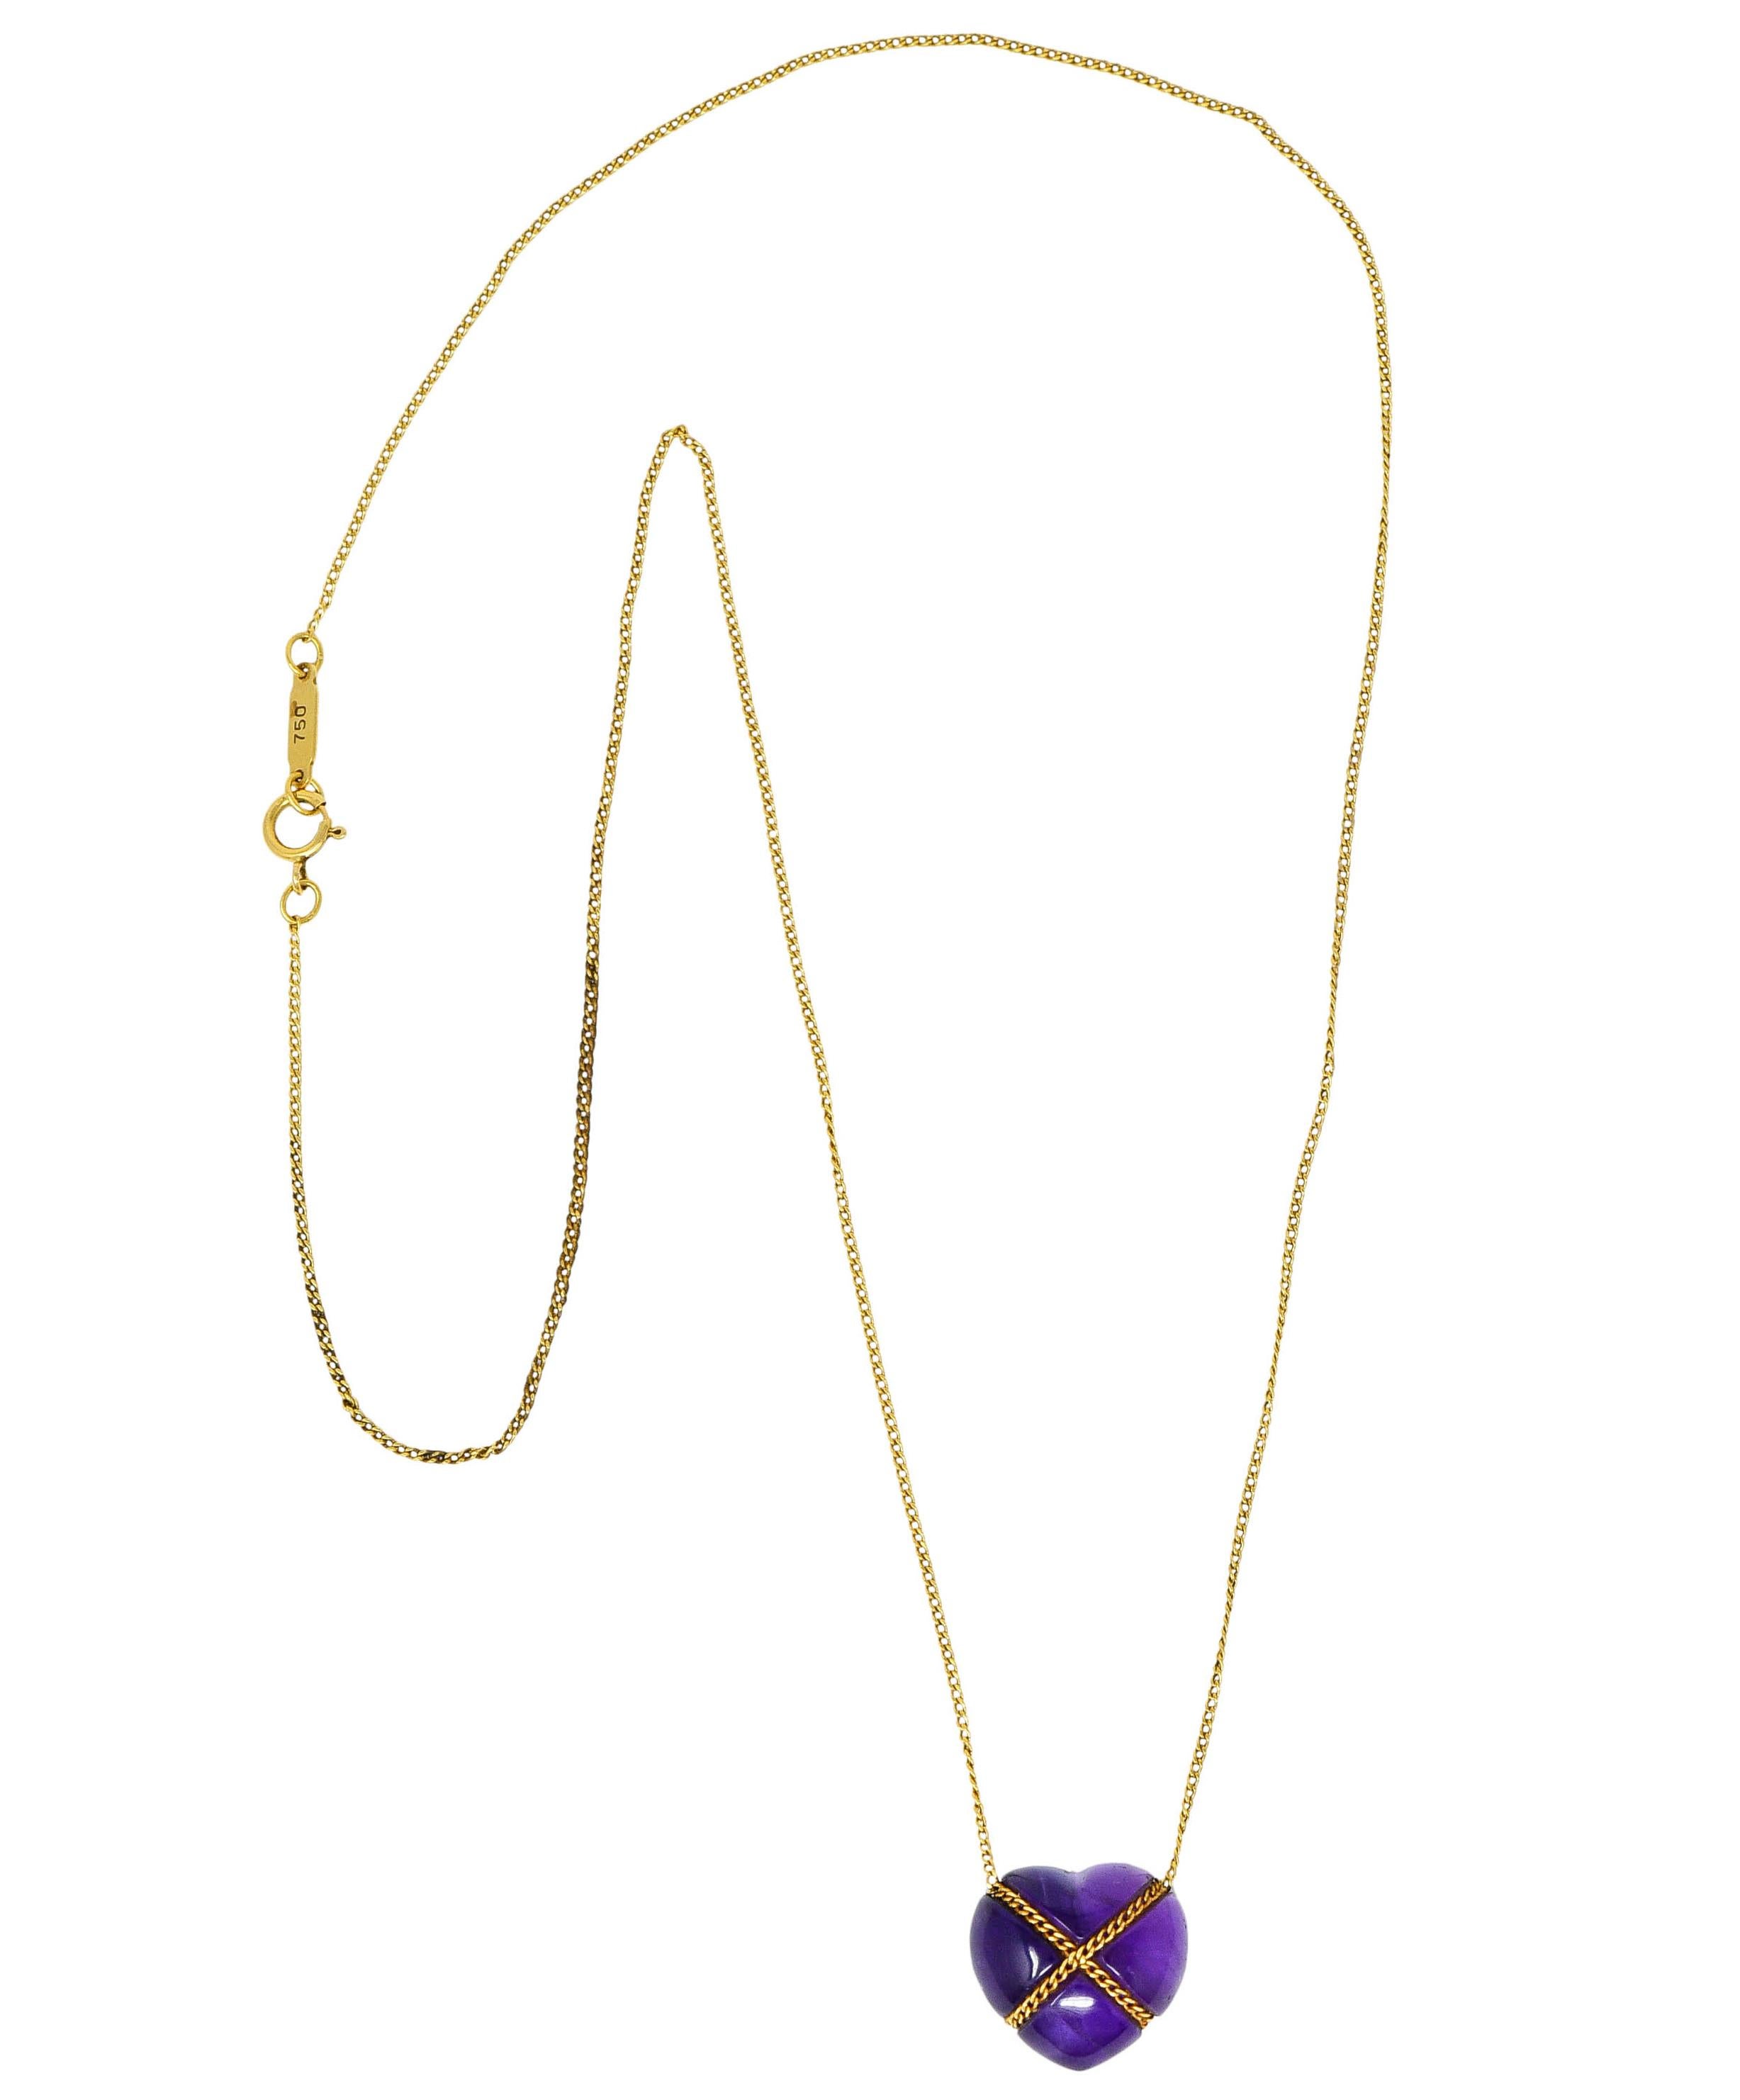 Classic curb chain necklace centers an amethyst heart cabochon

Bright purple and translucent with natural inclusions

Tightly wrapped with curb chain in an X motif

Necklace completes as a spring ring clasp

Logo link is stamped 750 for 18 karat